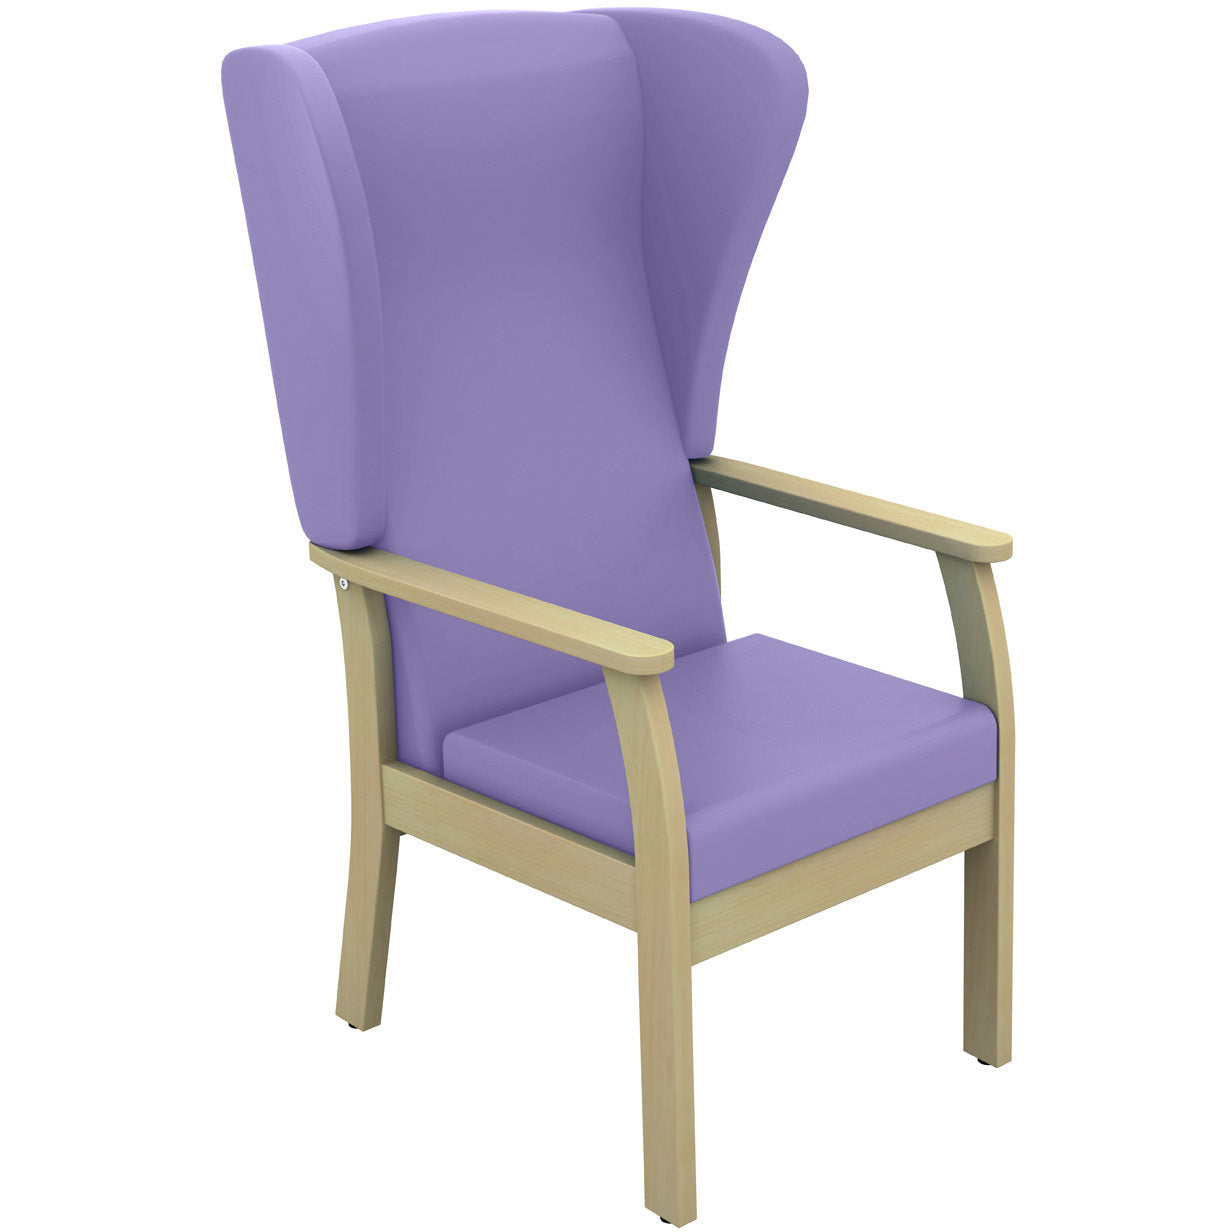 Sunflower Atlas High-Back Patient Chair with Wings - Vinyl Upholstery